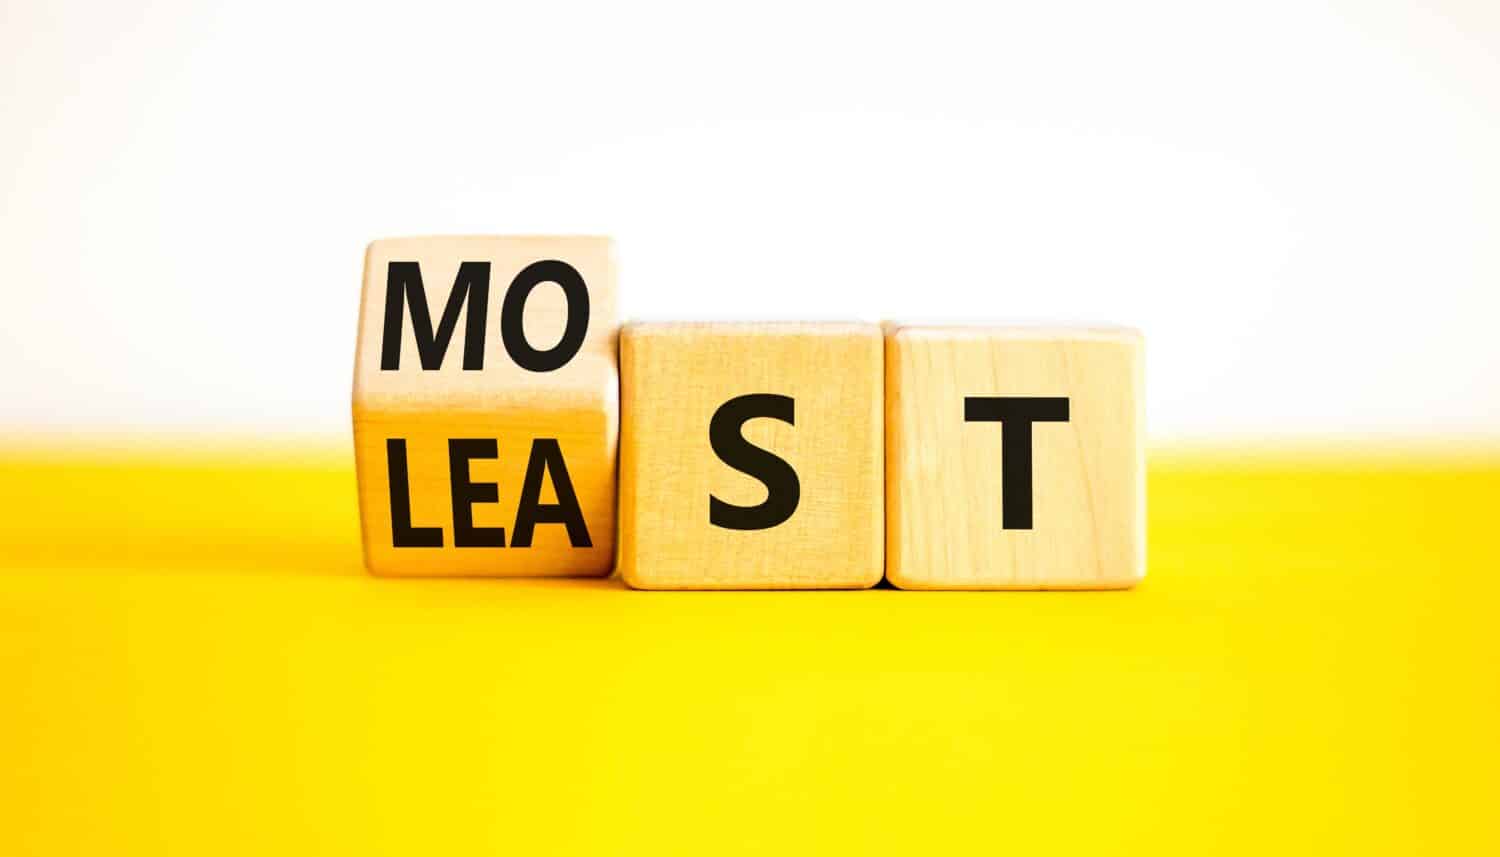 Most or least symbol. Businessman turns wooden cubes and changes the word Least to Most. Beautiful yellow table white background. Copy space. Business and most or least concept.